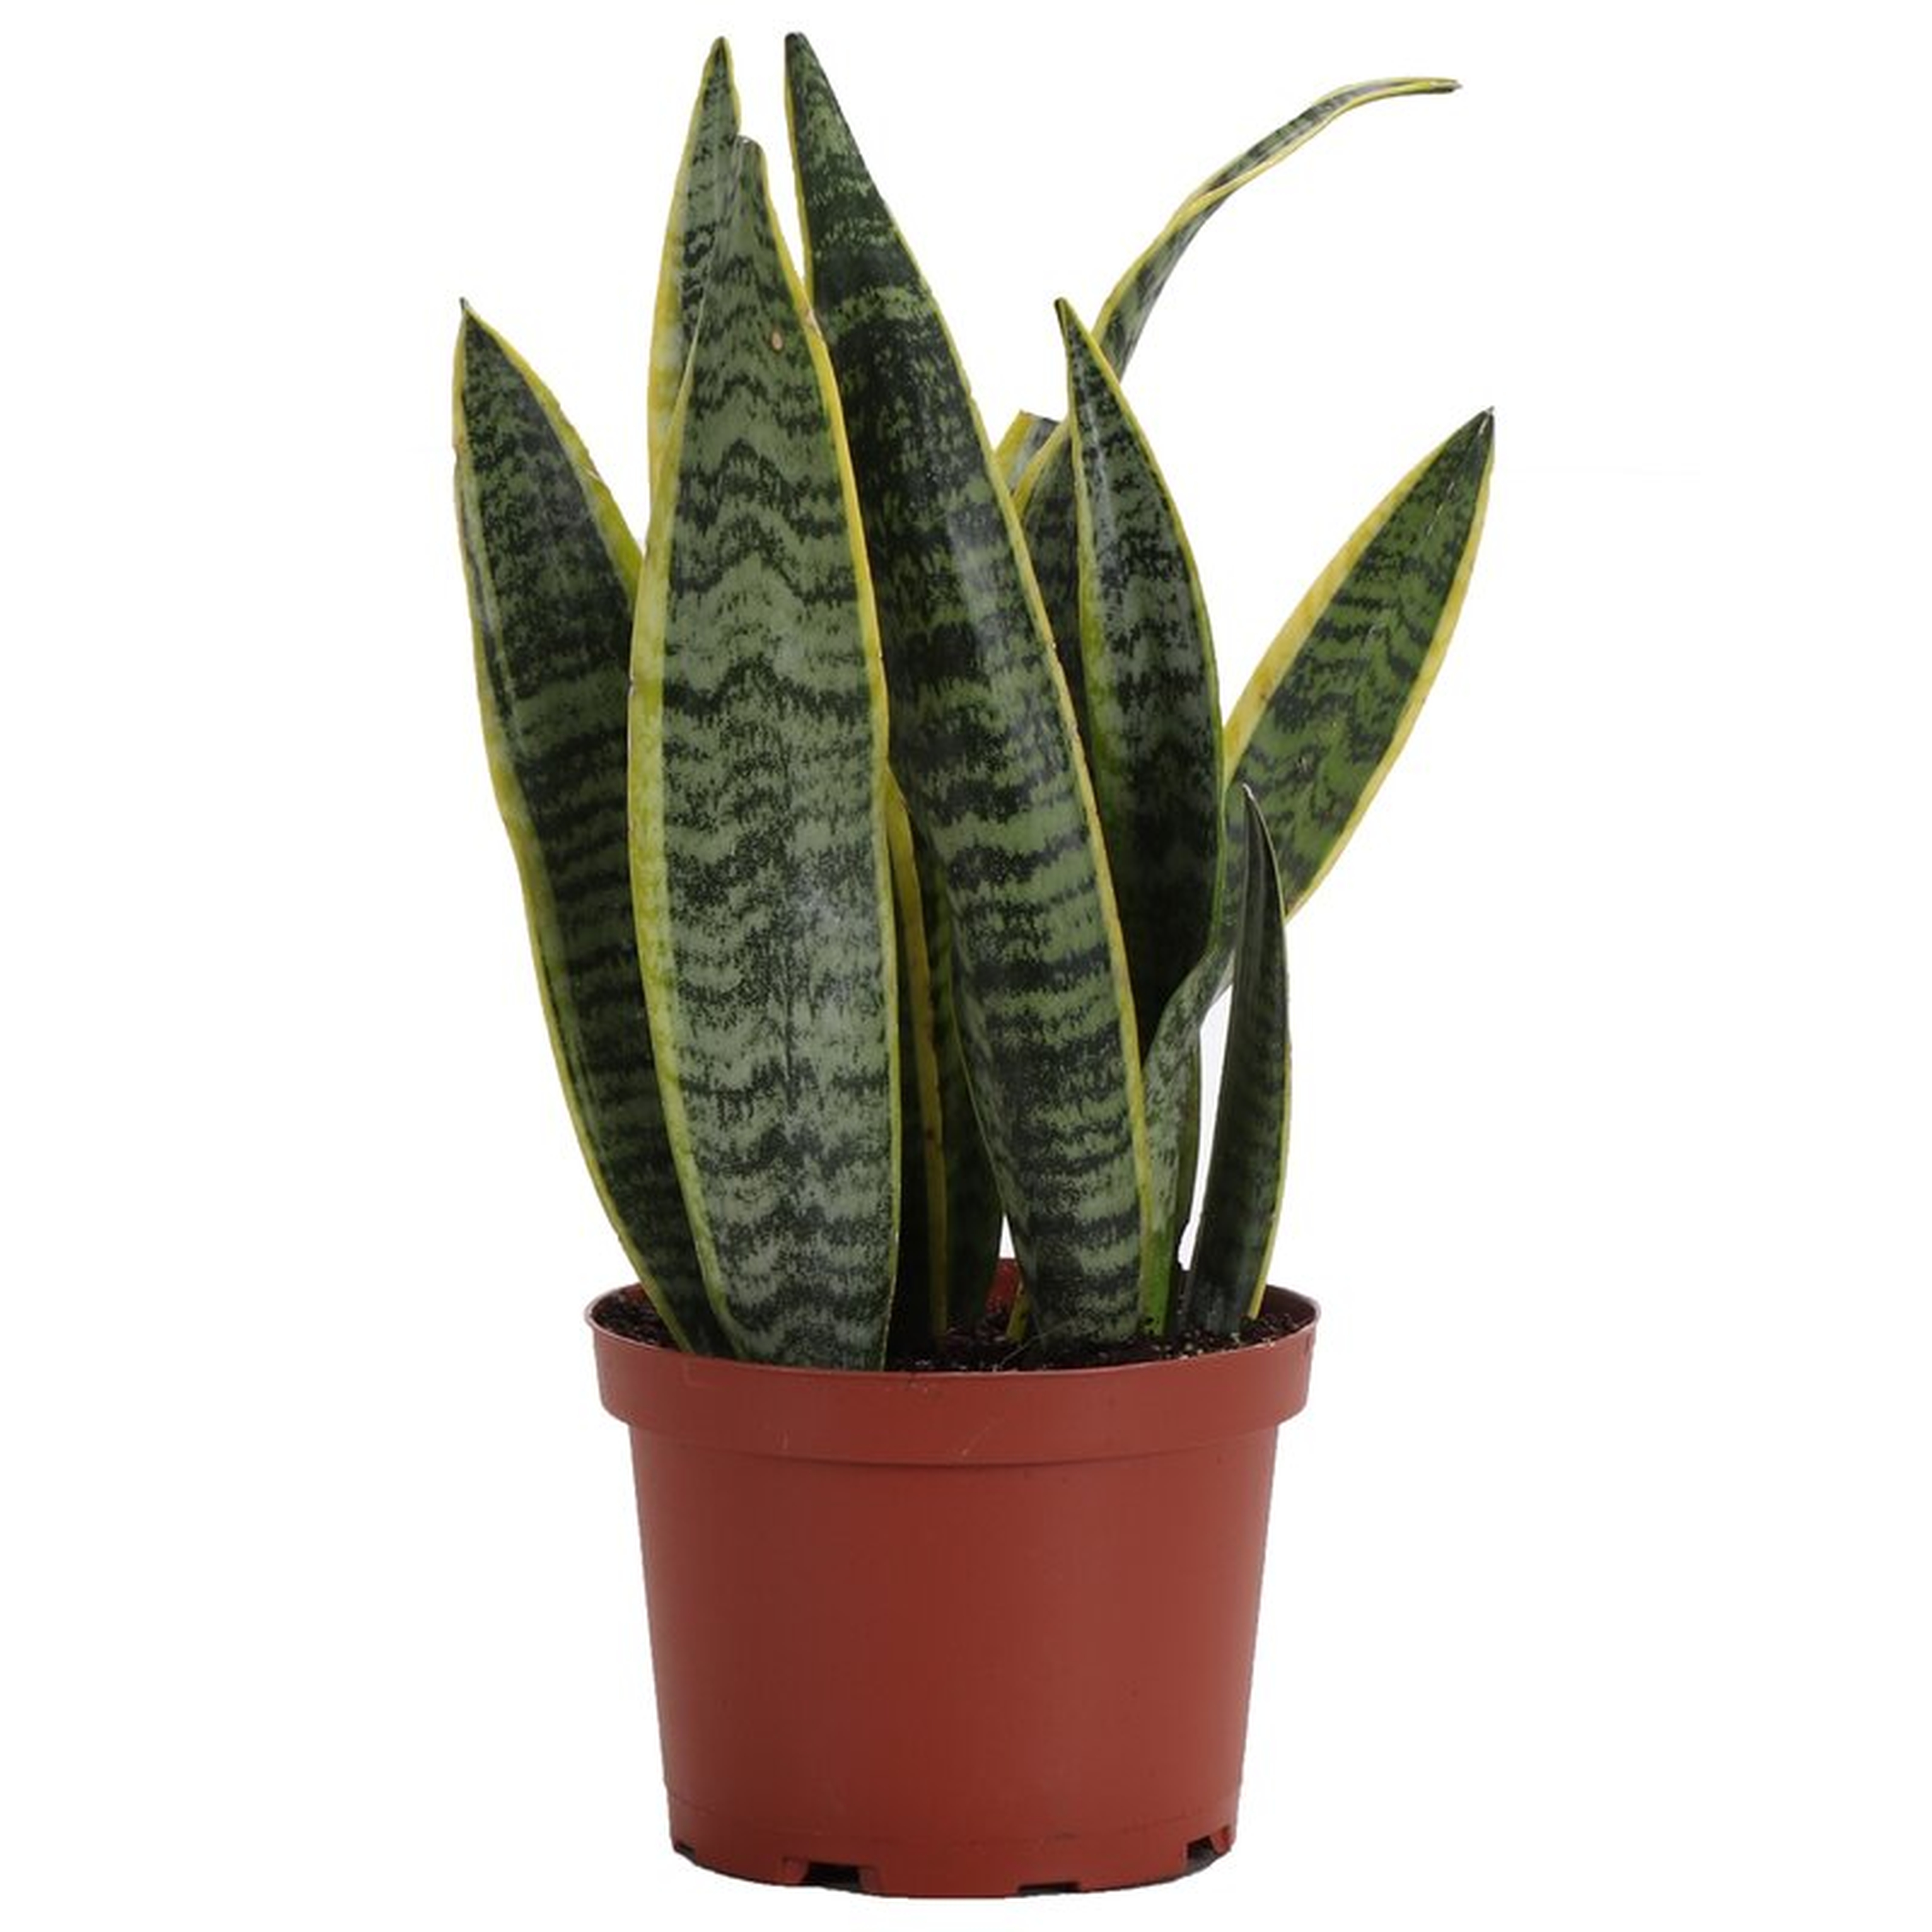 Thorsen's Greenhouse Live Snake Plant in Pot Size: 14" H x 6" W x 6" D - Perigold